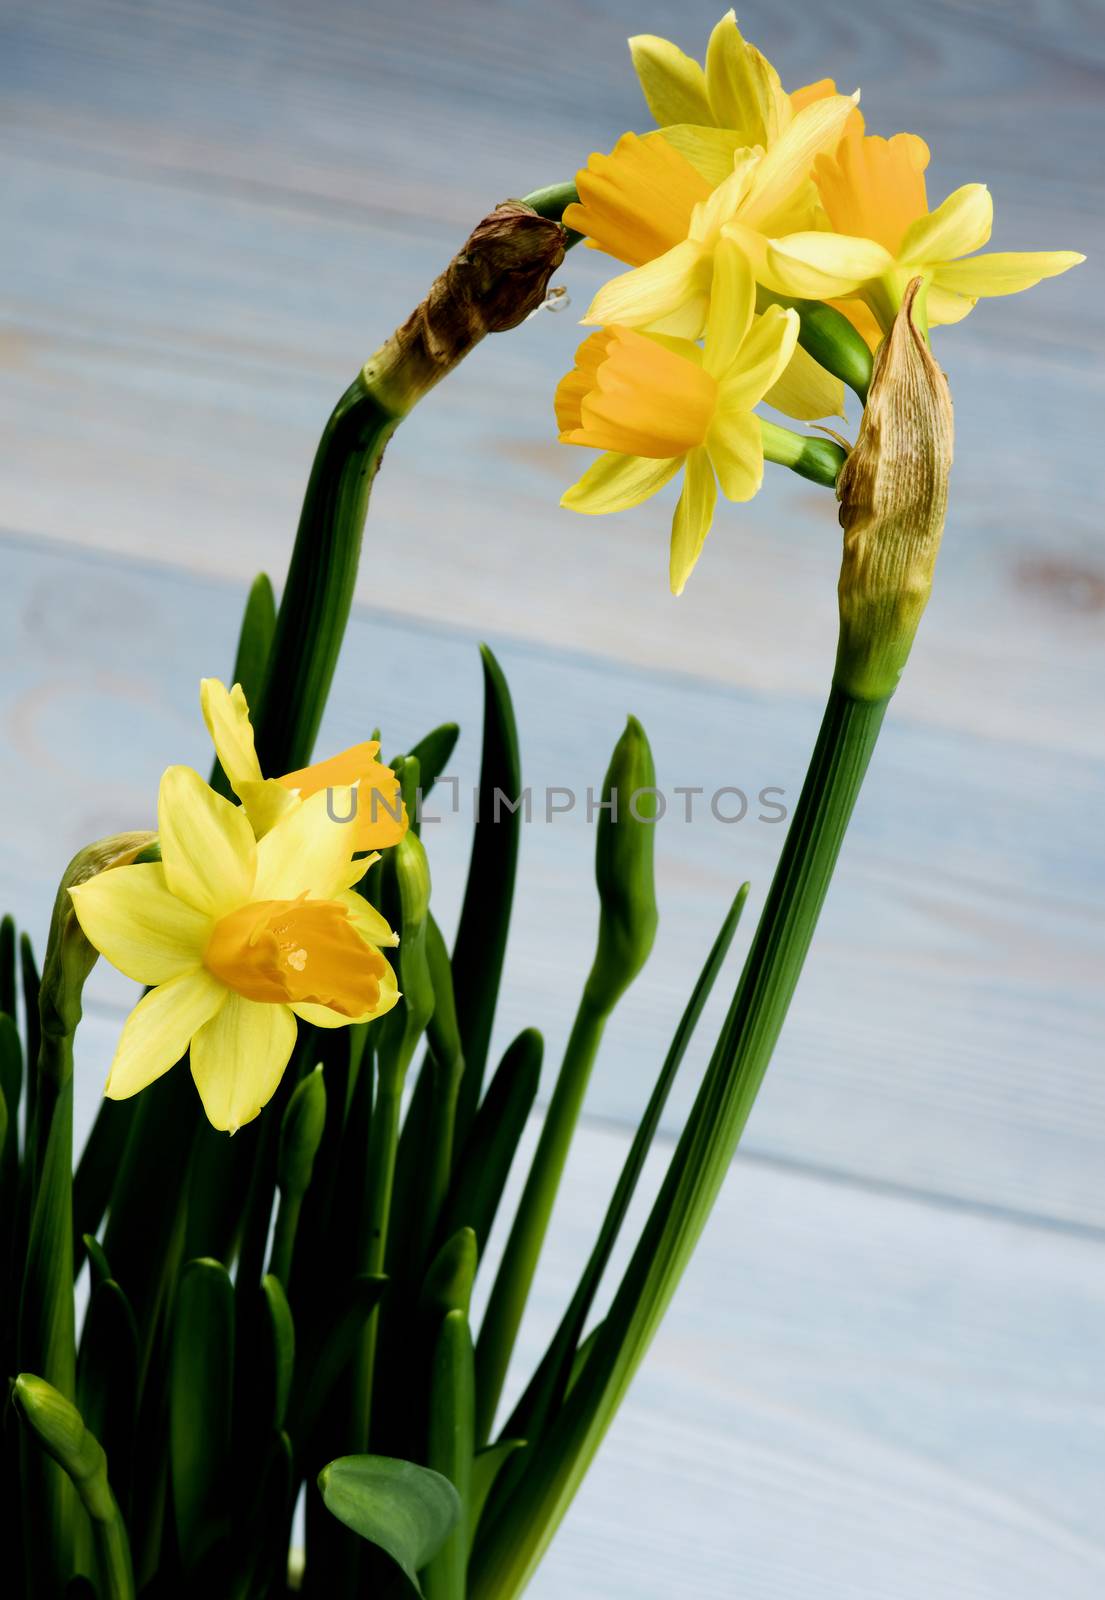 Bunch of Wild Yellow Daffodils with Buds closeup on Blurred Blue Wooden background